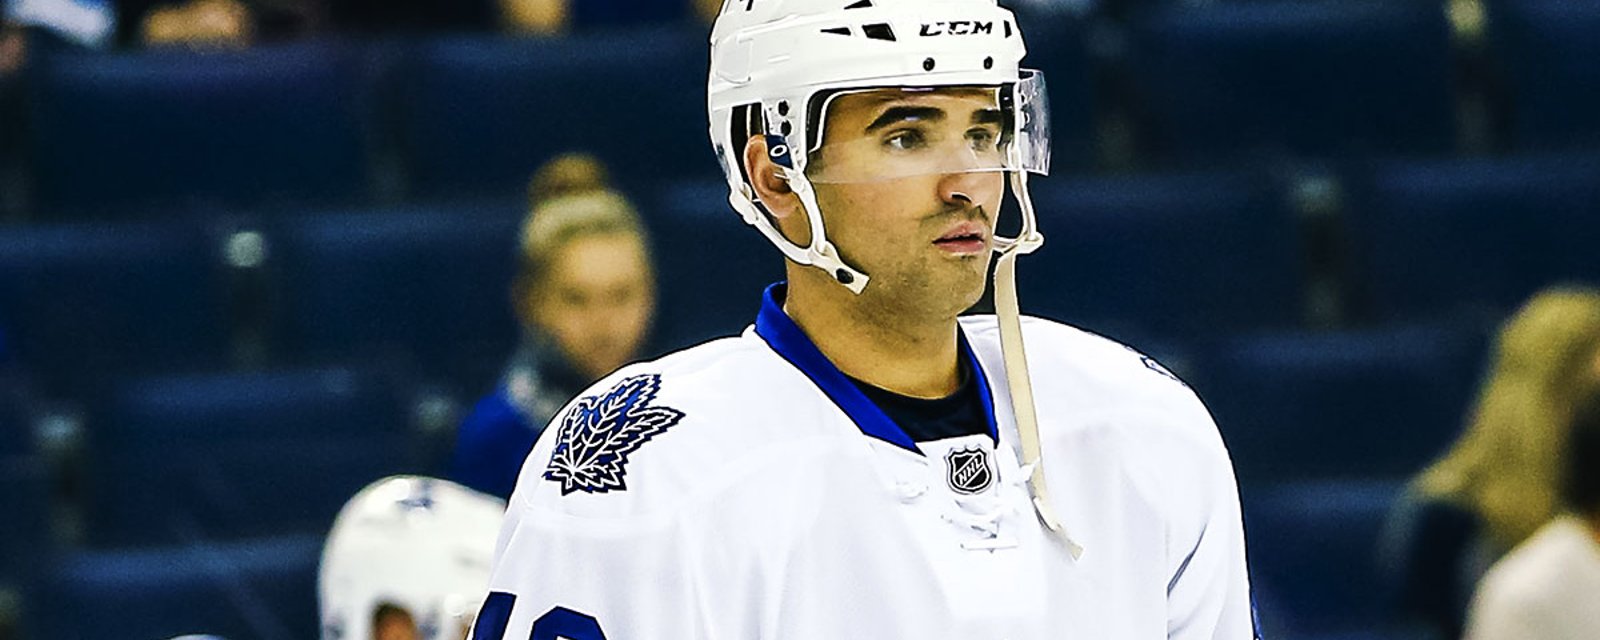 MUST READ: Some stats regarding Kadri and Gardiner should give you some faith.